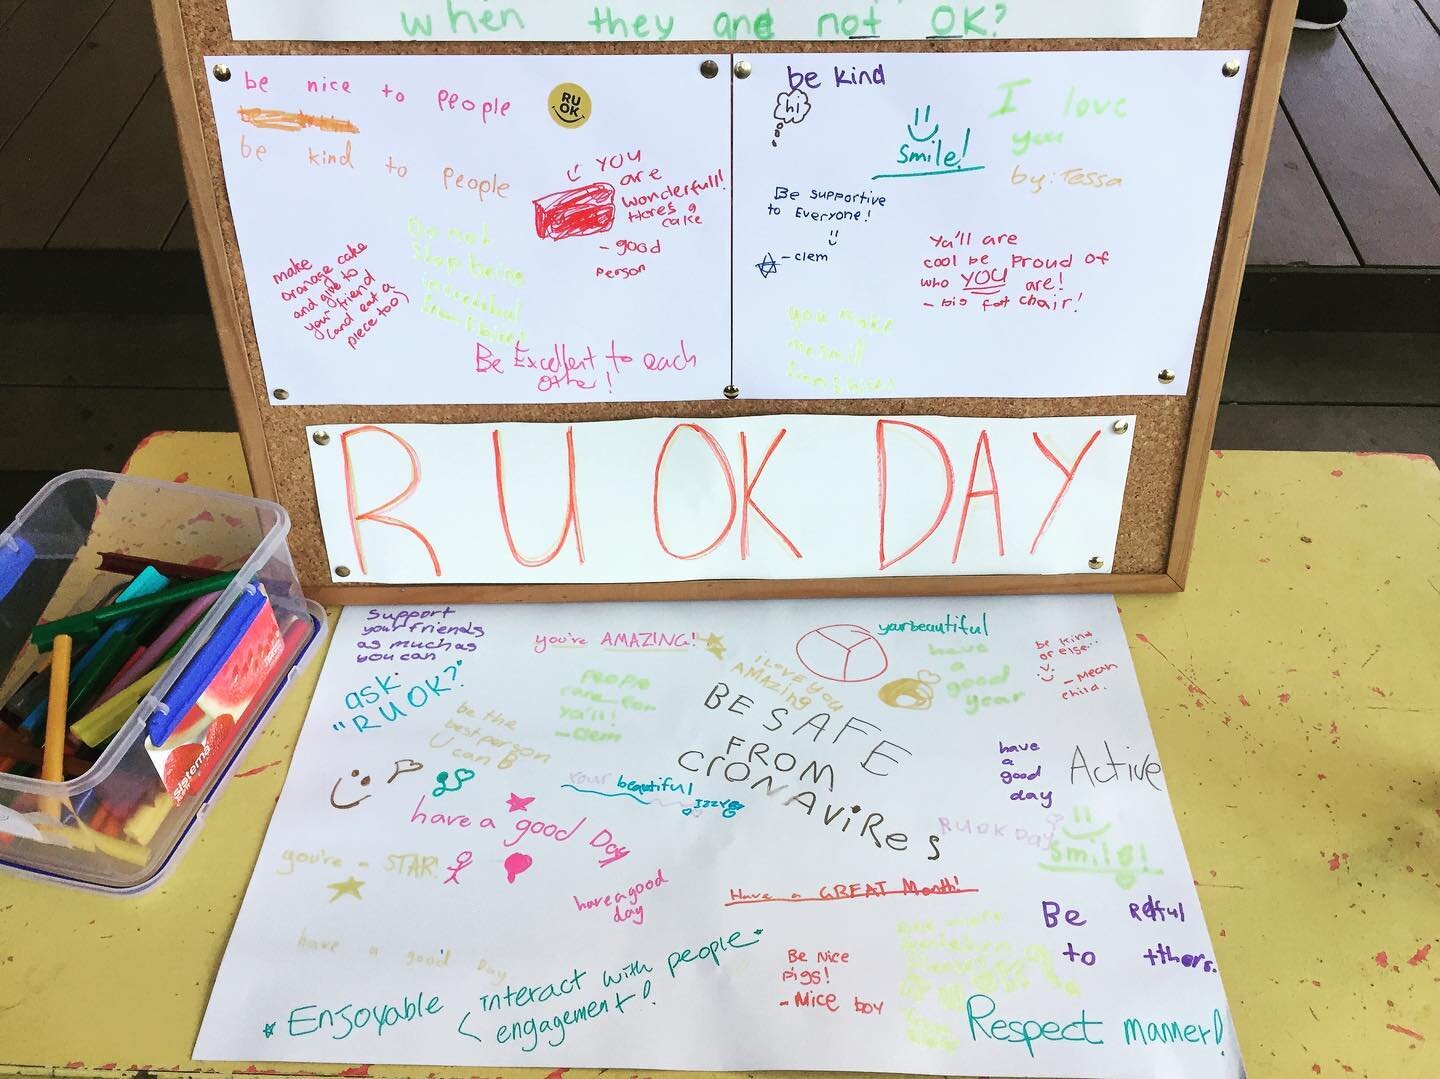 Today we celebrated R U OK Day by considering how we can support our friends. It was great to get parents and carer&rsquo;s thoughts too. 

QA 2 - Child&rsquo;s Health and Safety 
QA 5 - Relationships With Children 
QA 6 - Collaborative partnerships 